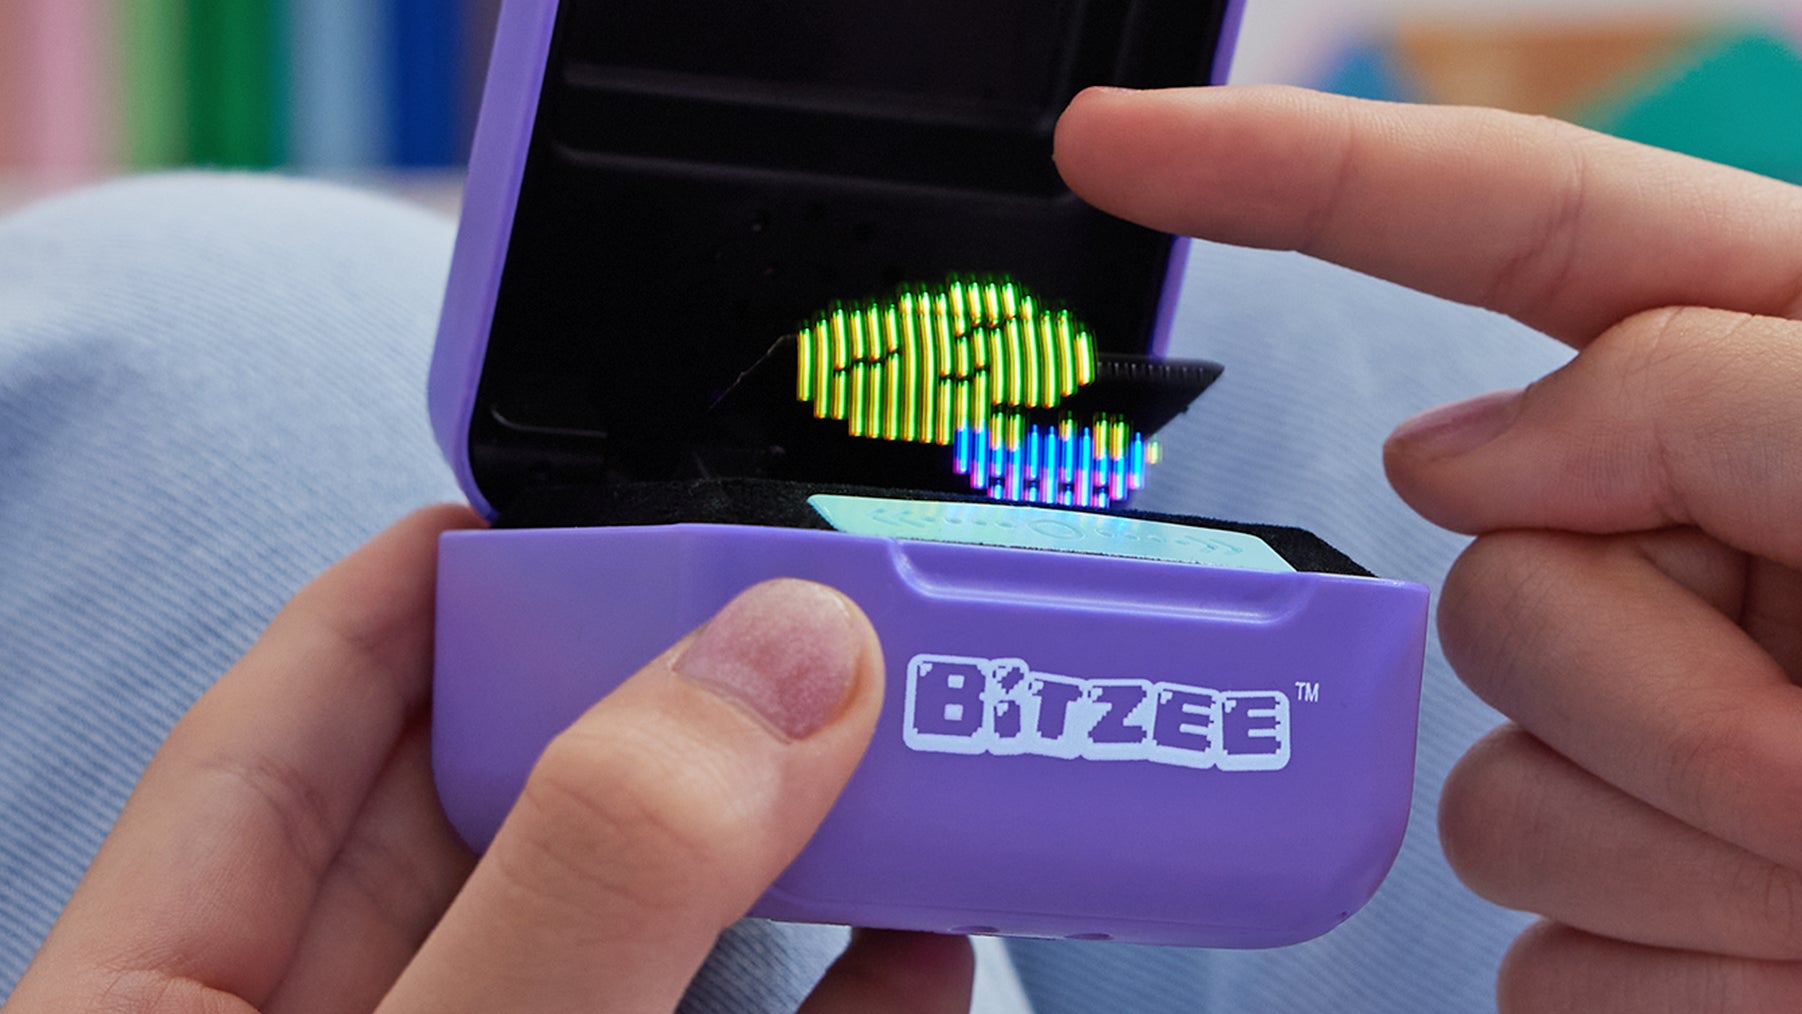 There are several ways to interact with the Bitzee digital pets, including shaking and tilting the device. (Image: Spin Master)